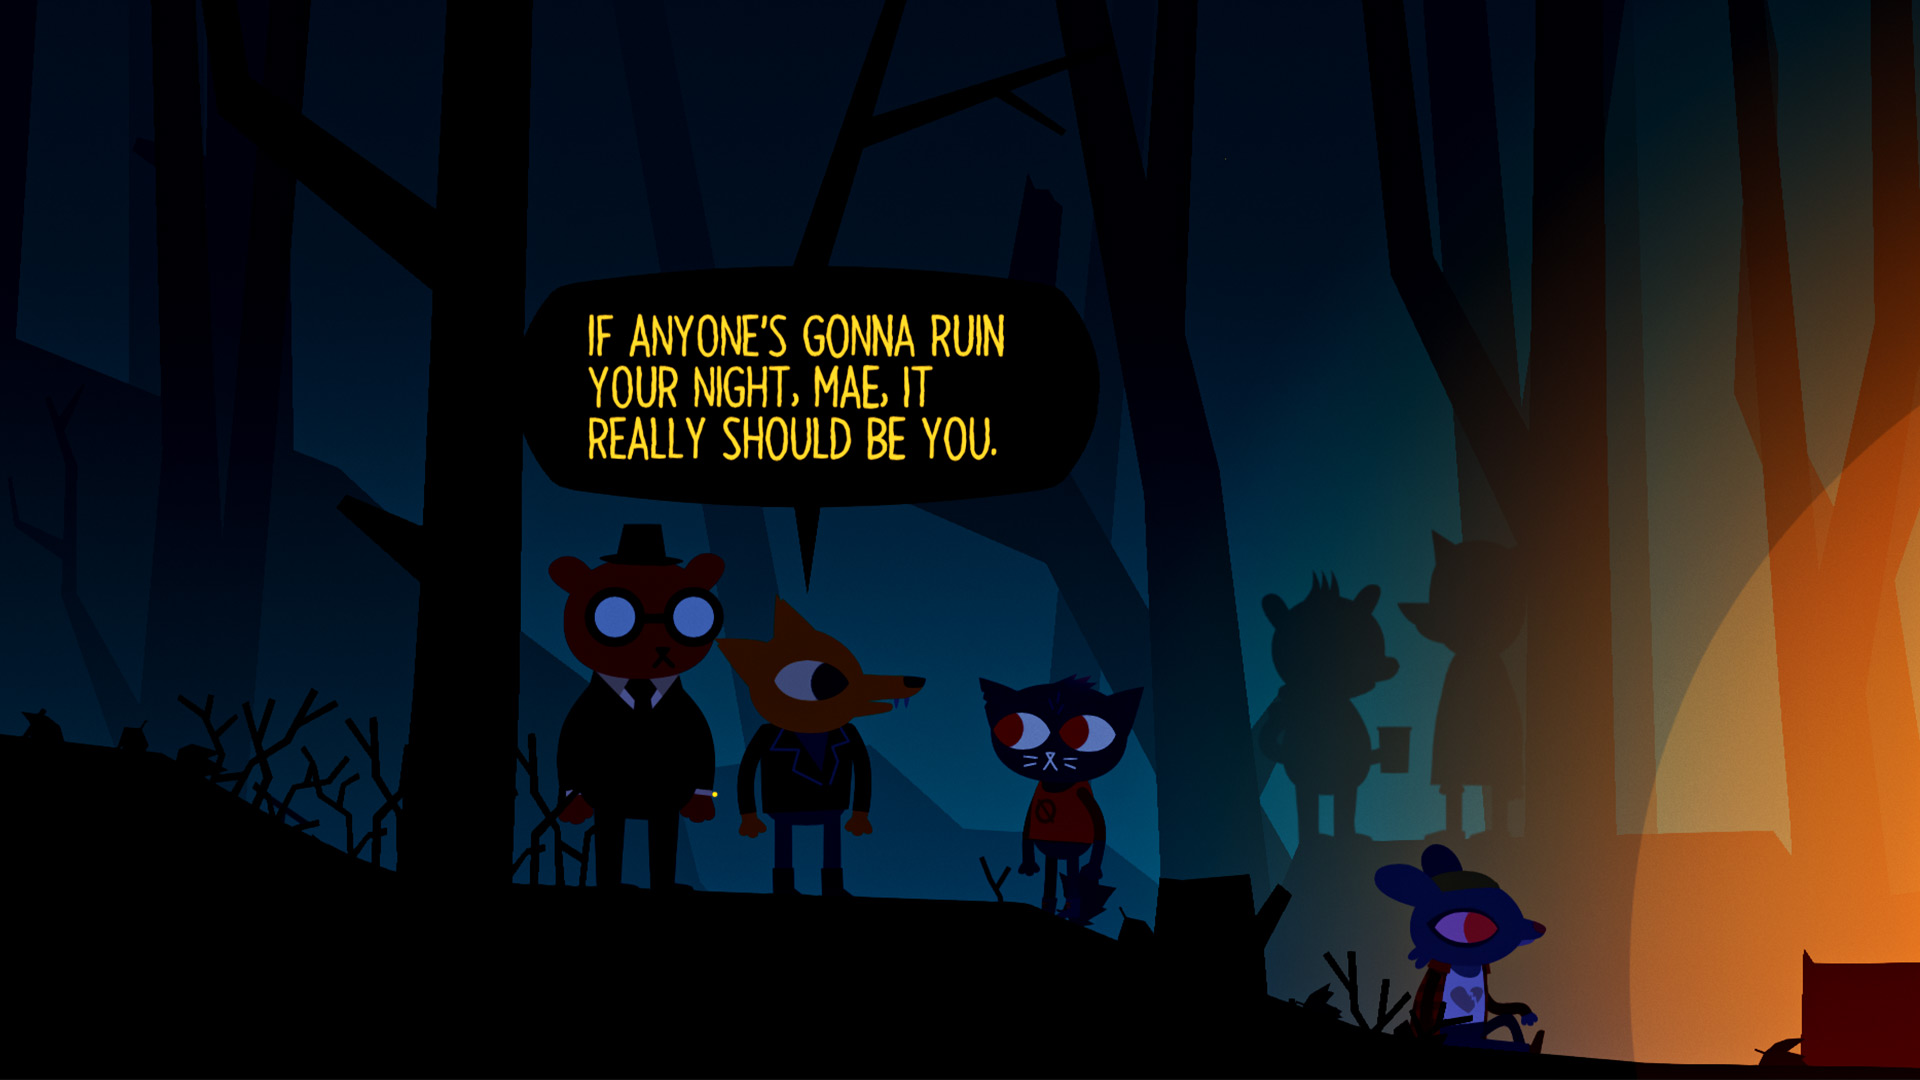 'If anyone's gonna ruin your night, Mae, it really should be you' Greg, an orange fox, says to the protagonist of Night in the Woods.